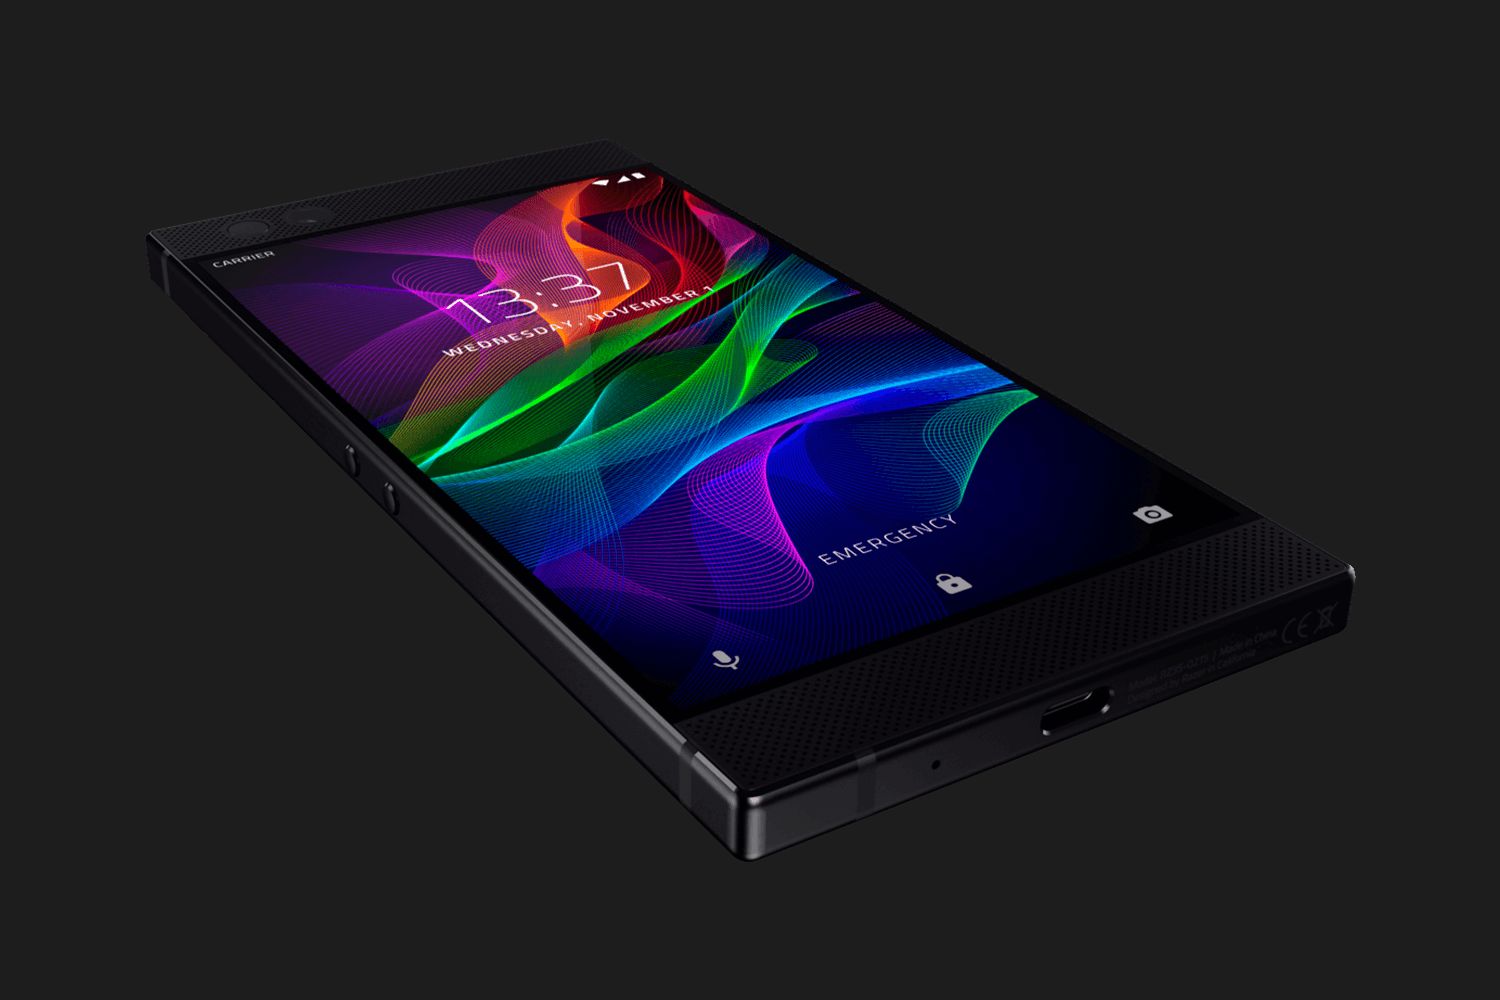 Deal alert: $100 Off for Razer Phone with Promo code 2